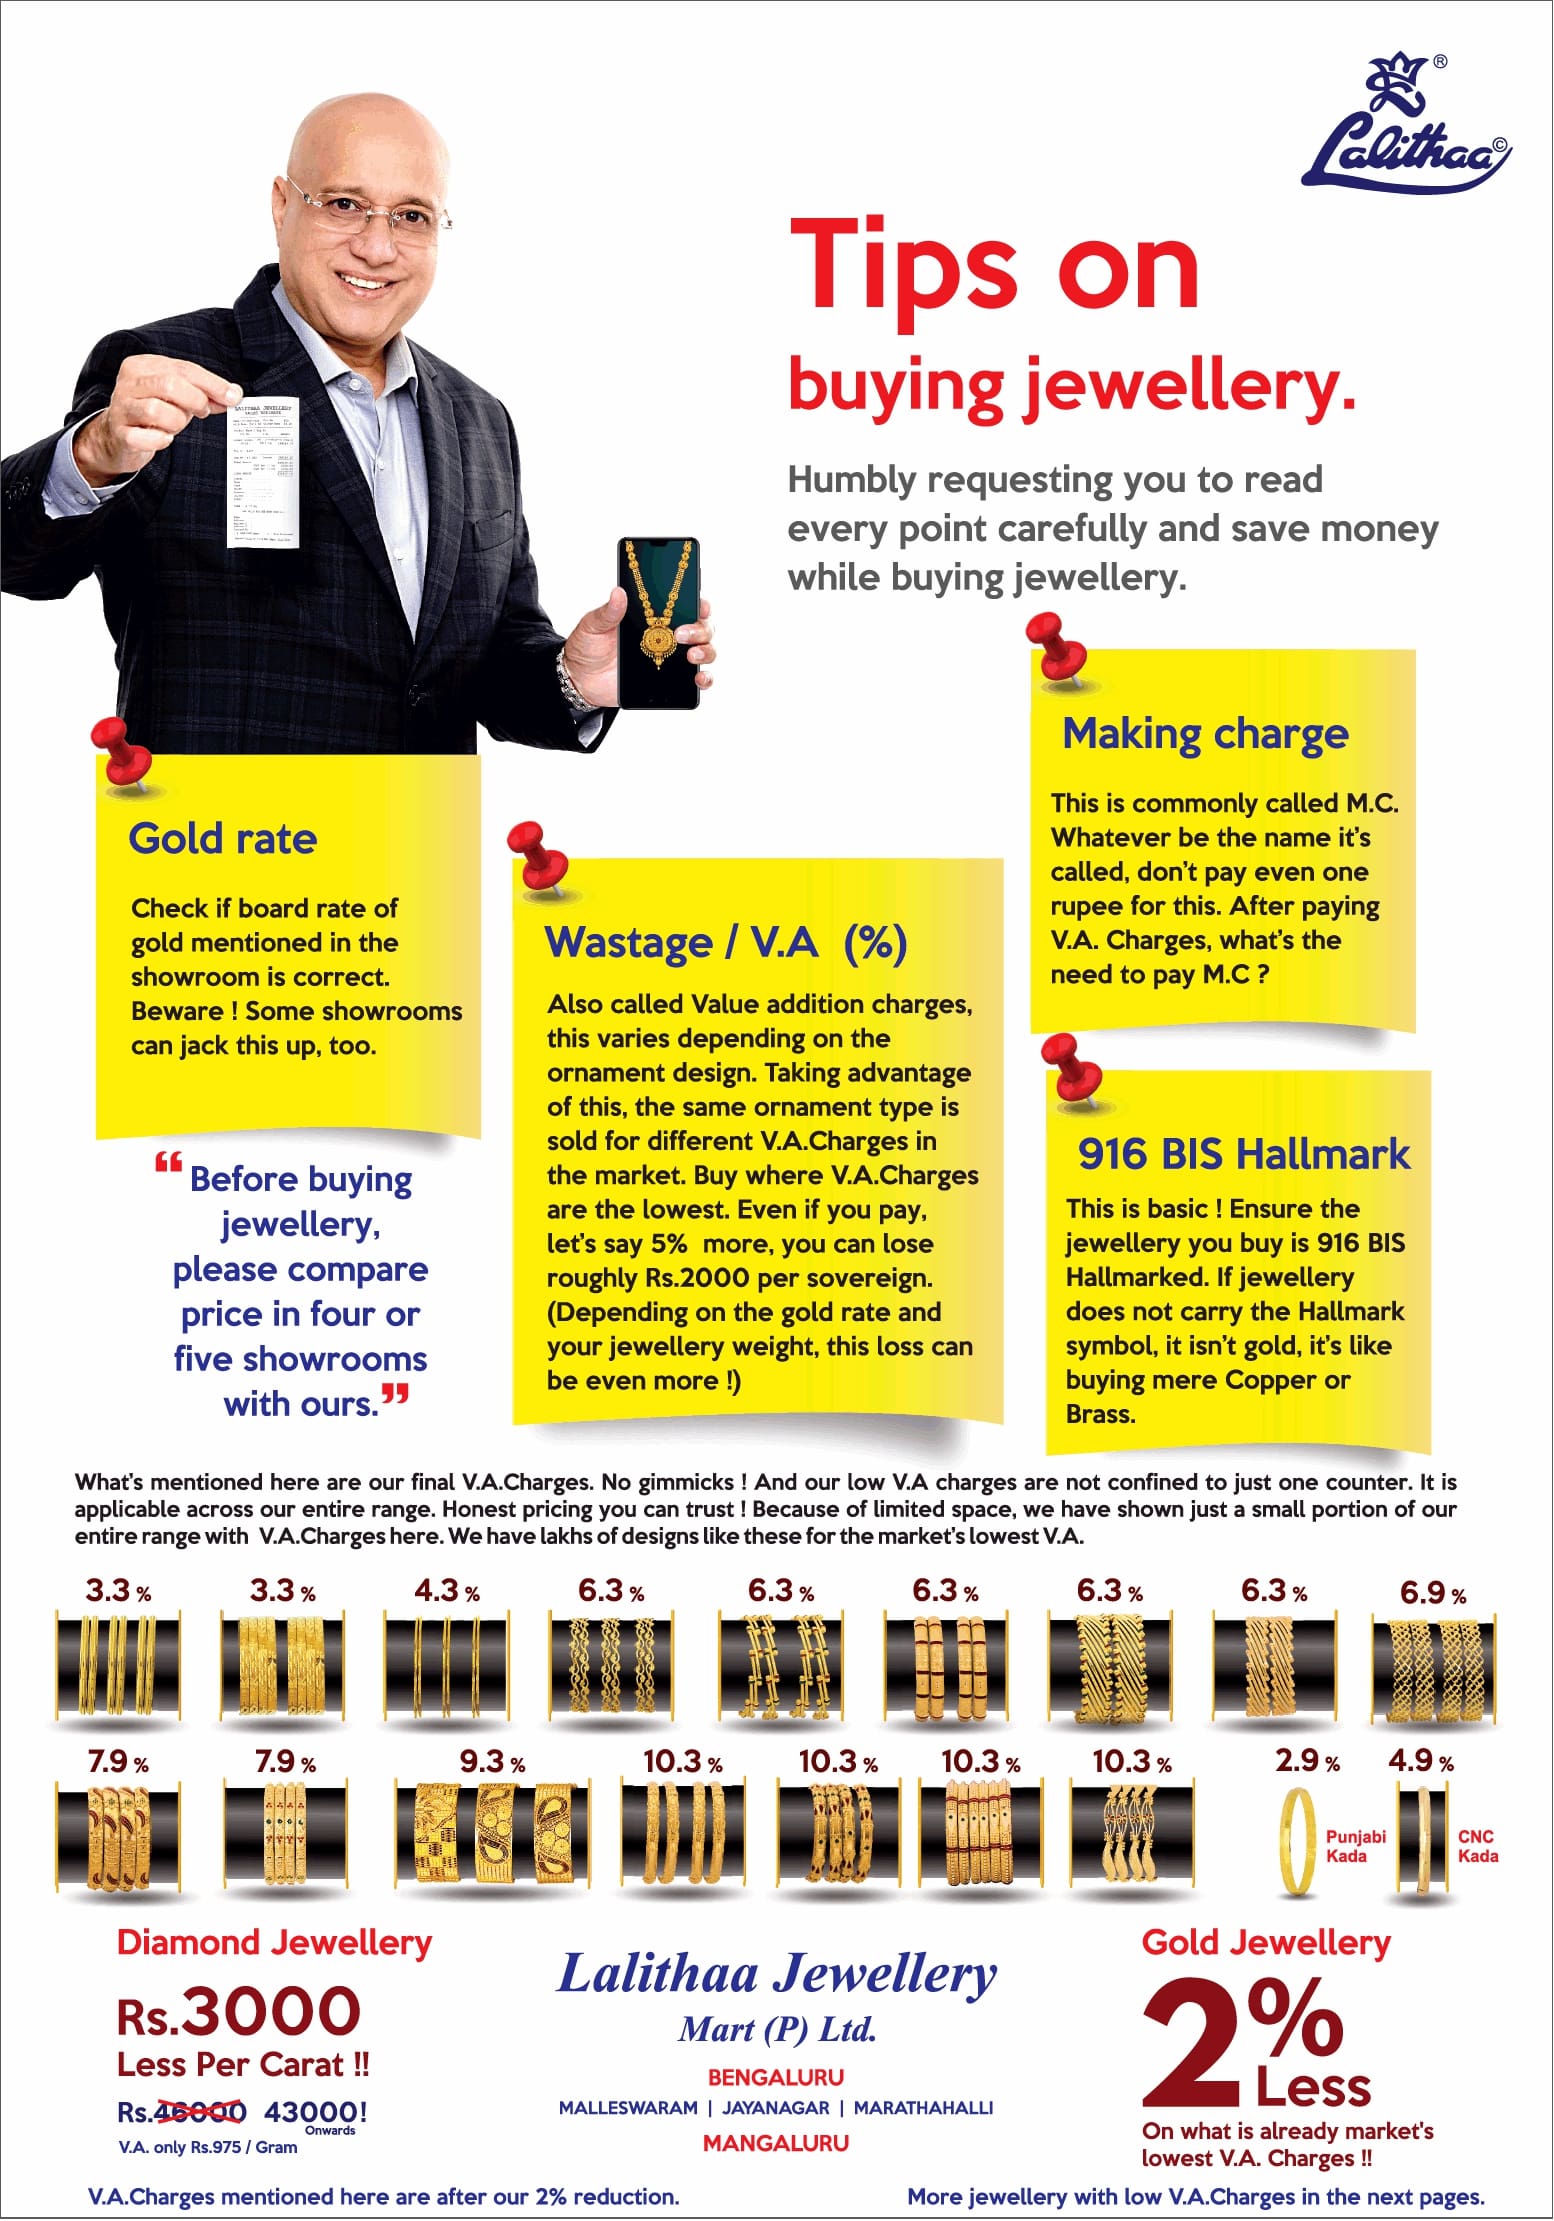 lalitha-jewellery-mart-p-ltd-tips-on-buying-jewellery-ad-times-of-india-bangalore-24-12-2020